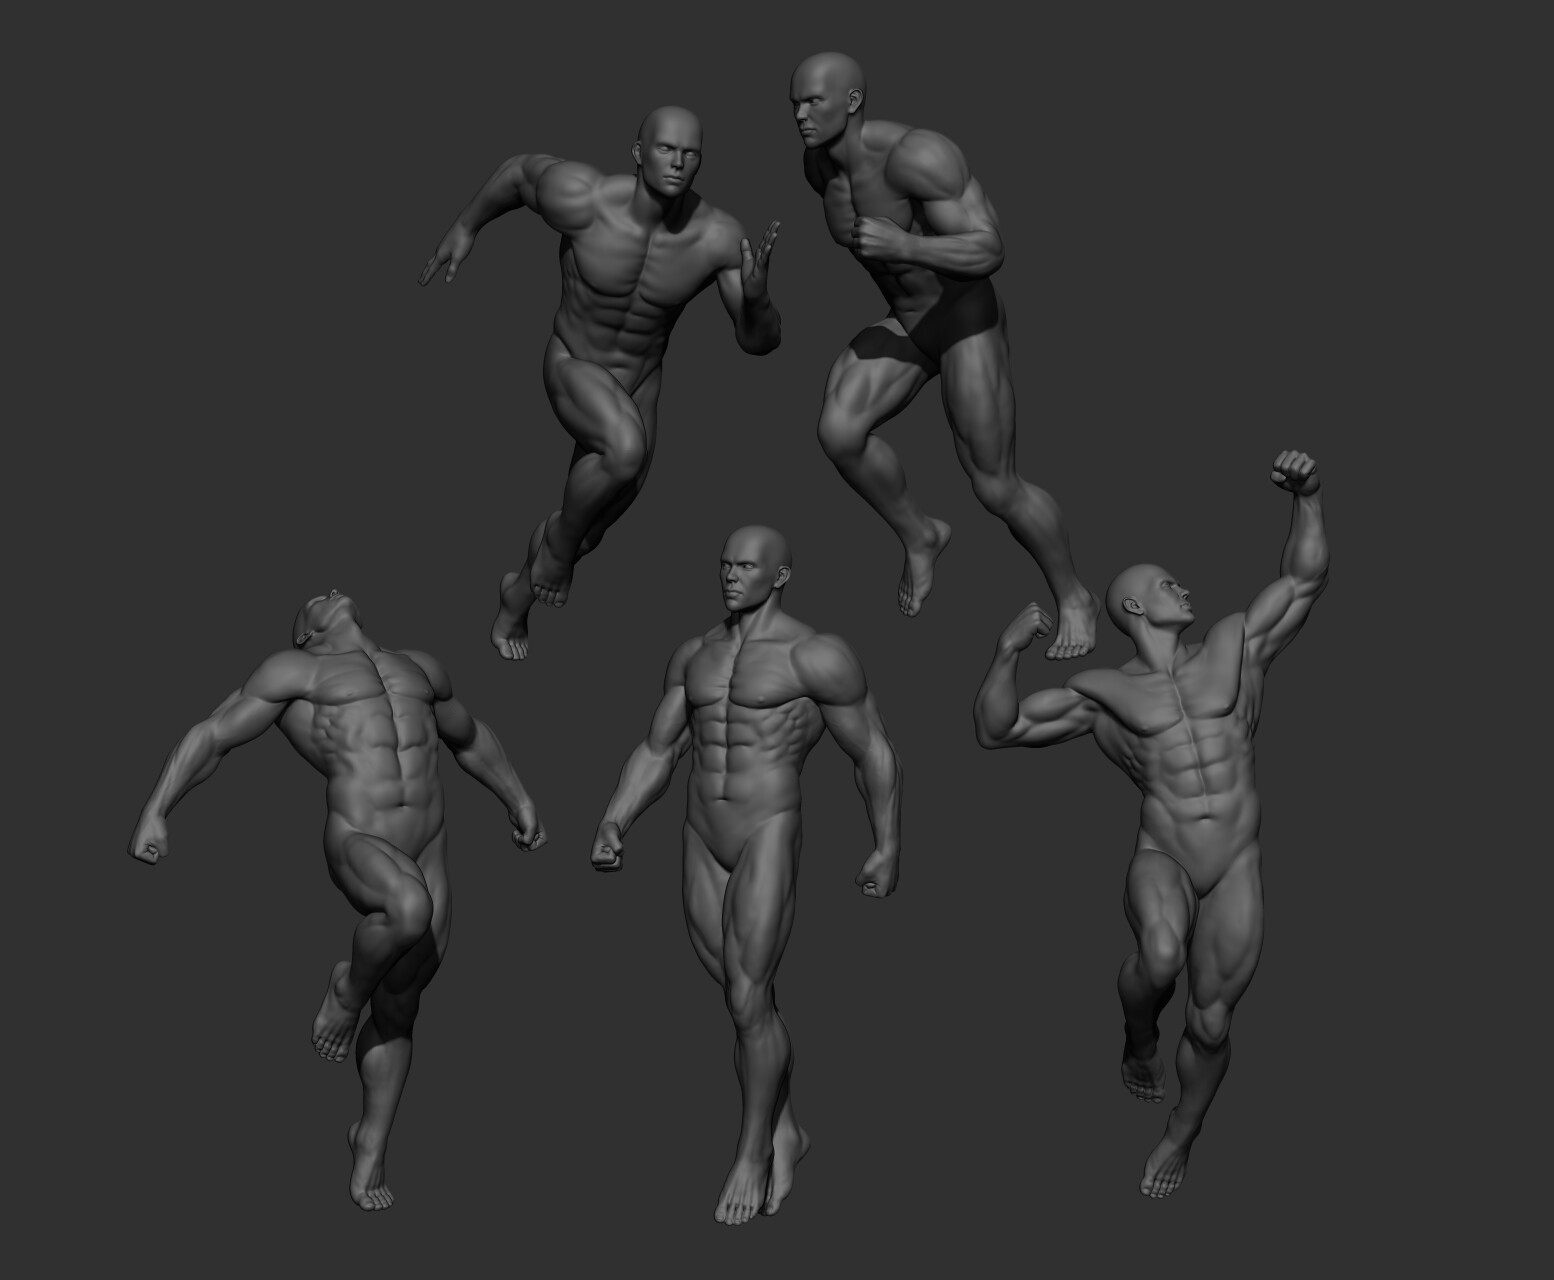 Yoga Poses 3d Animated Anatomy Model Of A Man In Pose Backgrounds | JPG  Free Download - Pikbest